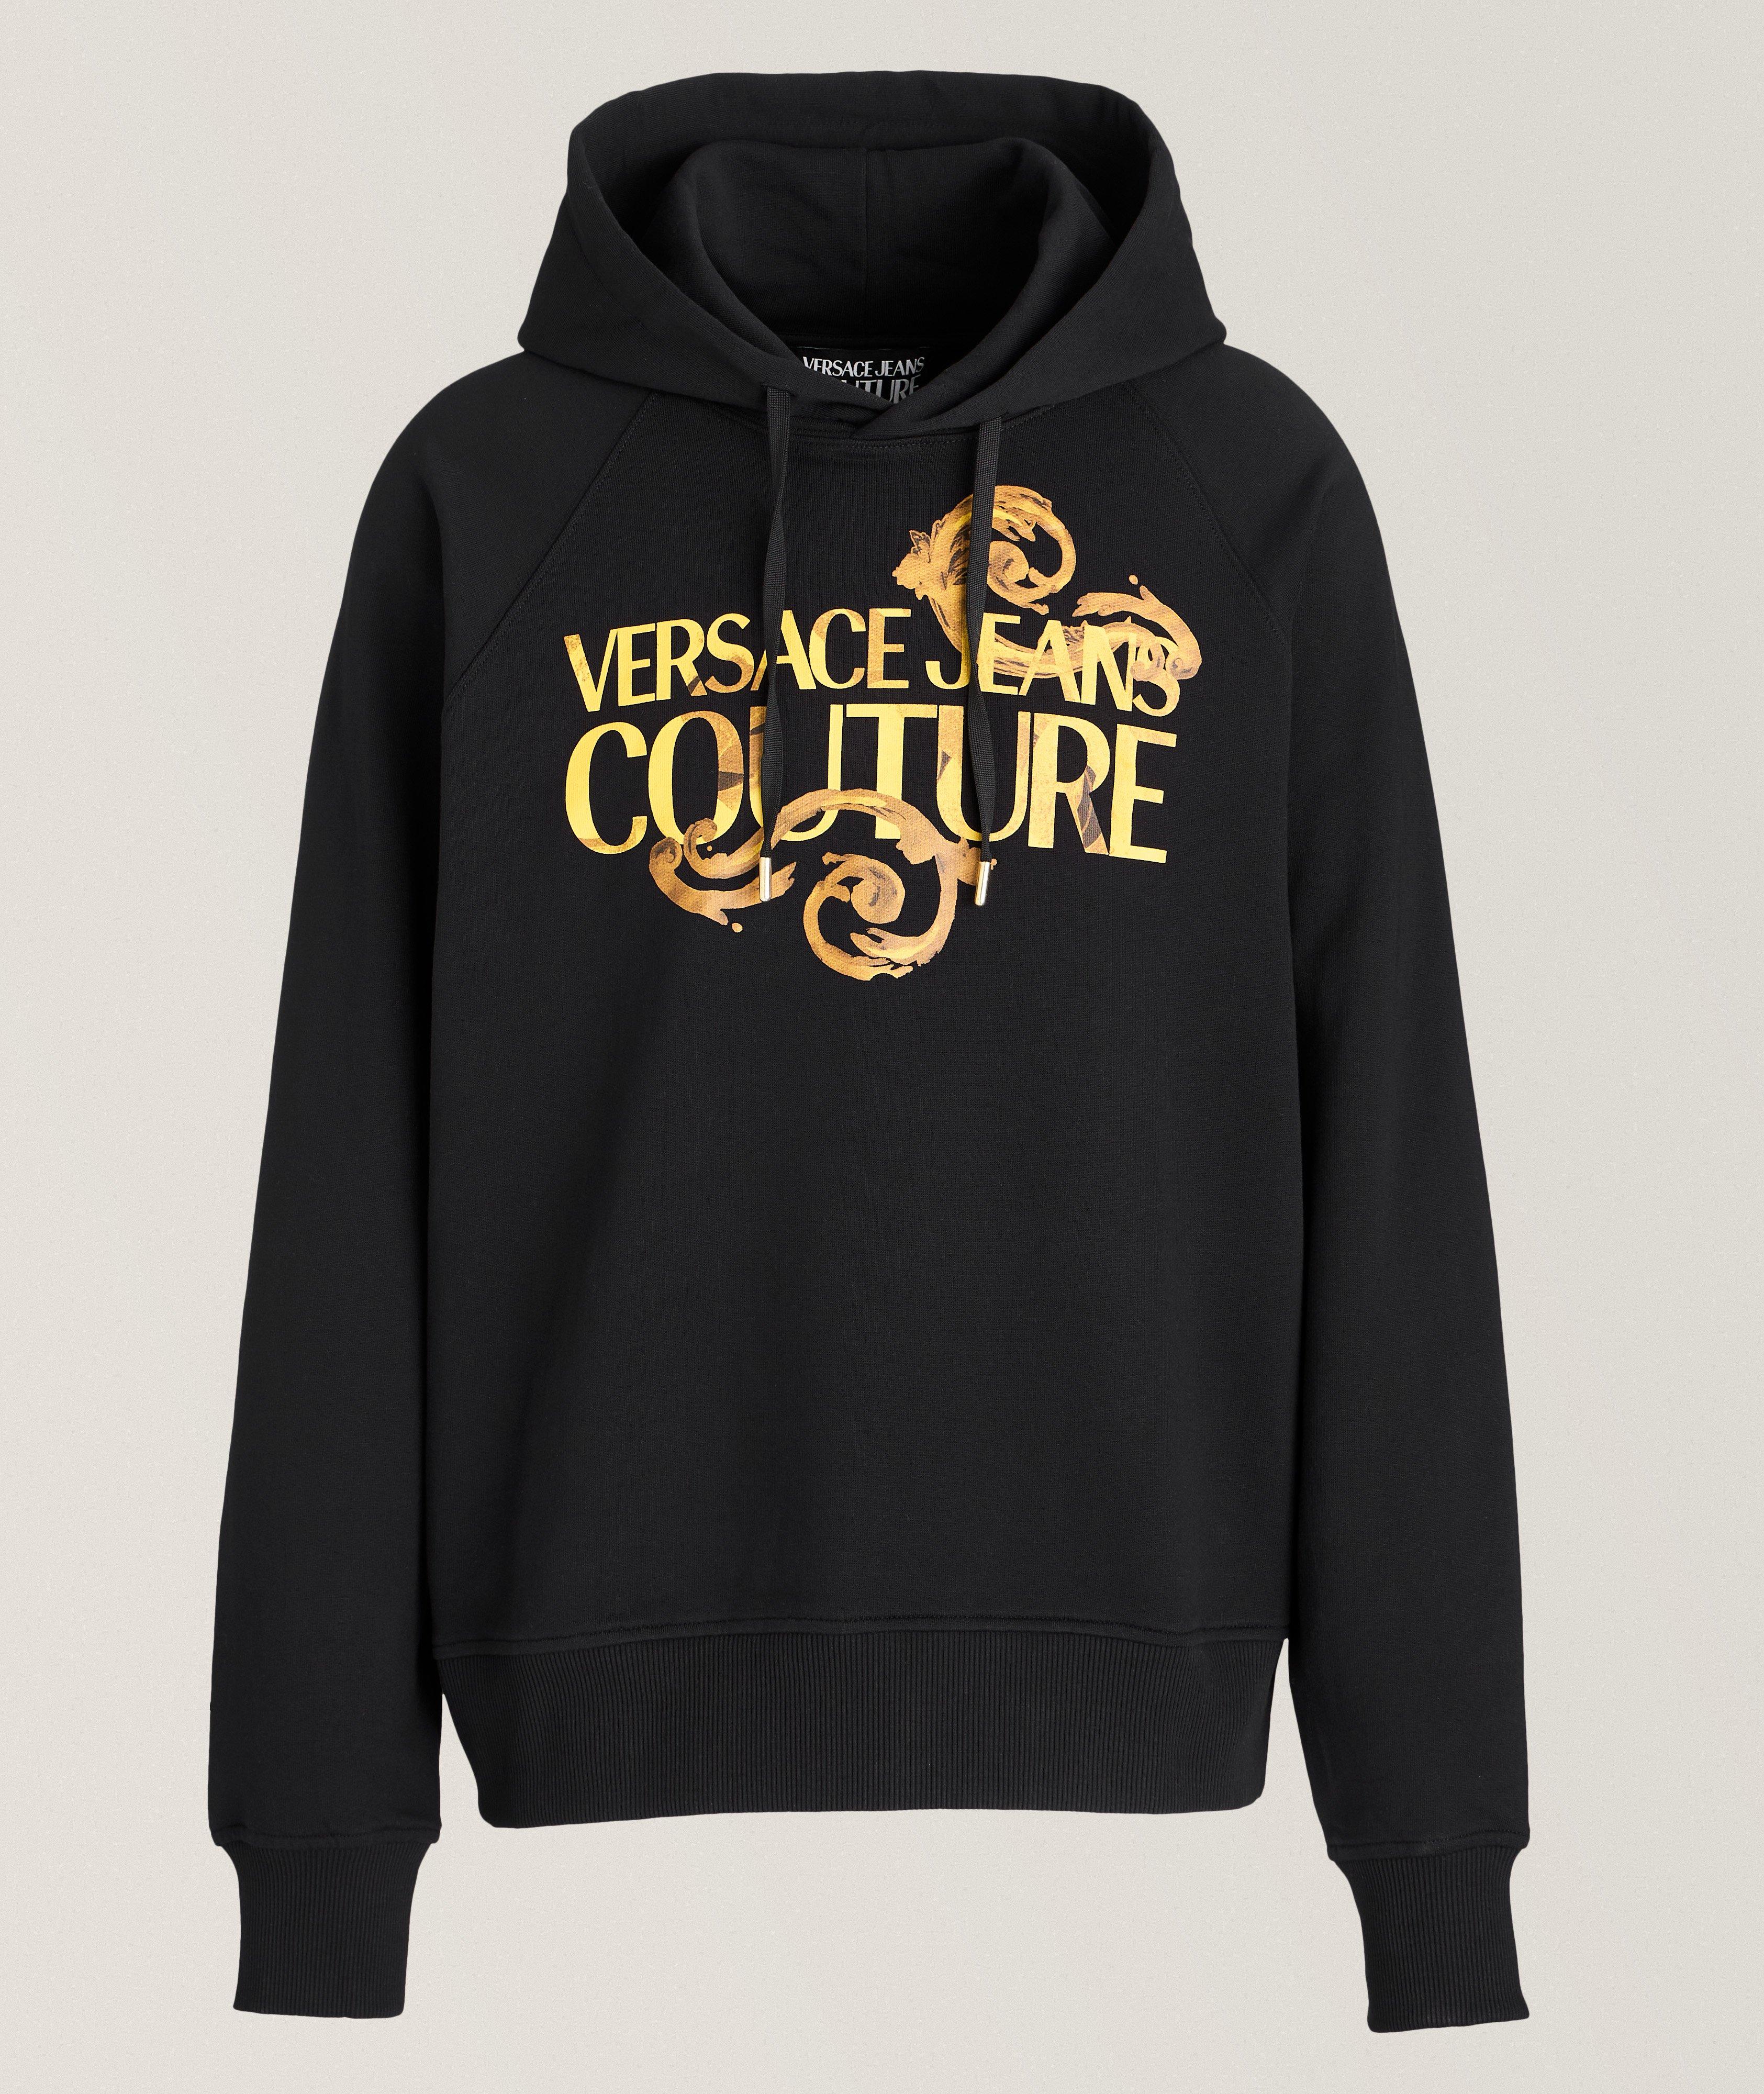 Versace Yellow And Black Pattern Unisex Hoodie Outfit For Women